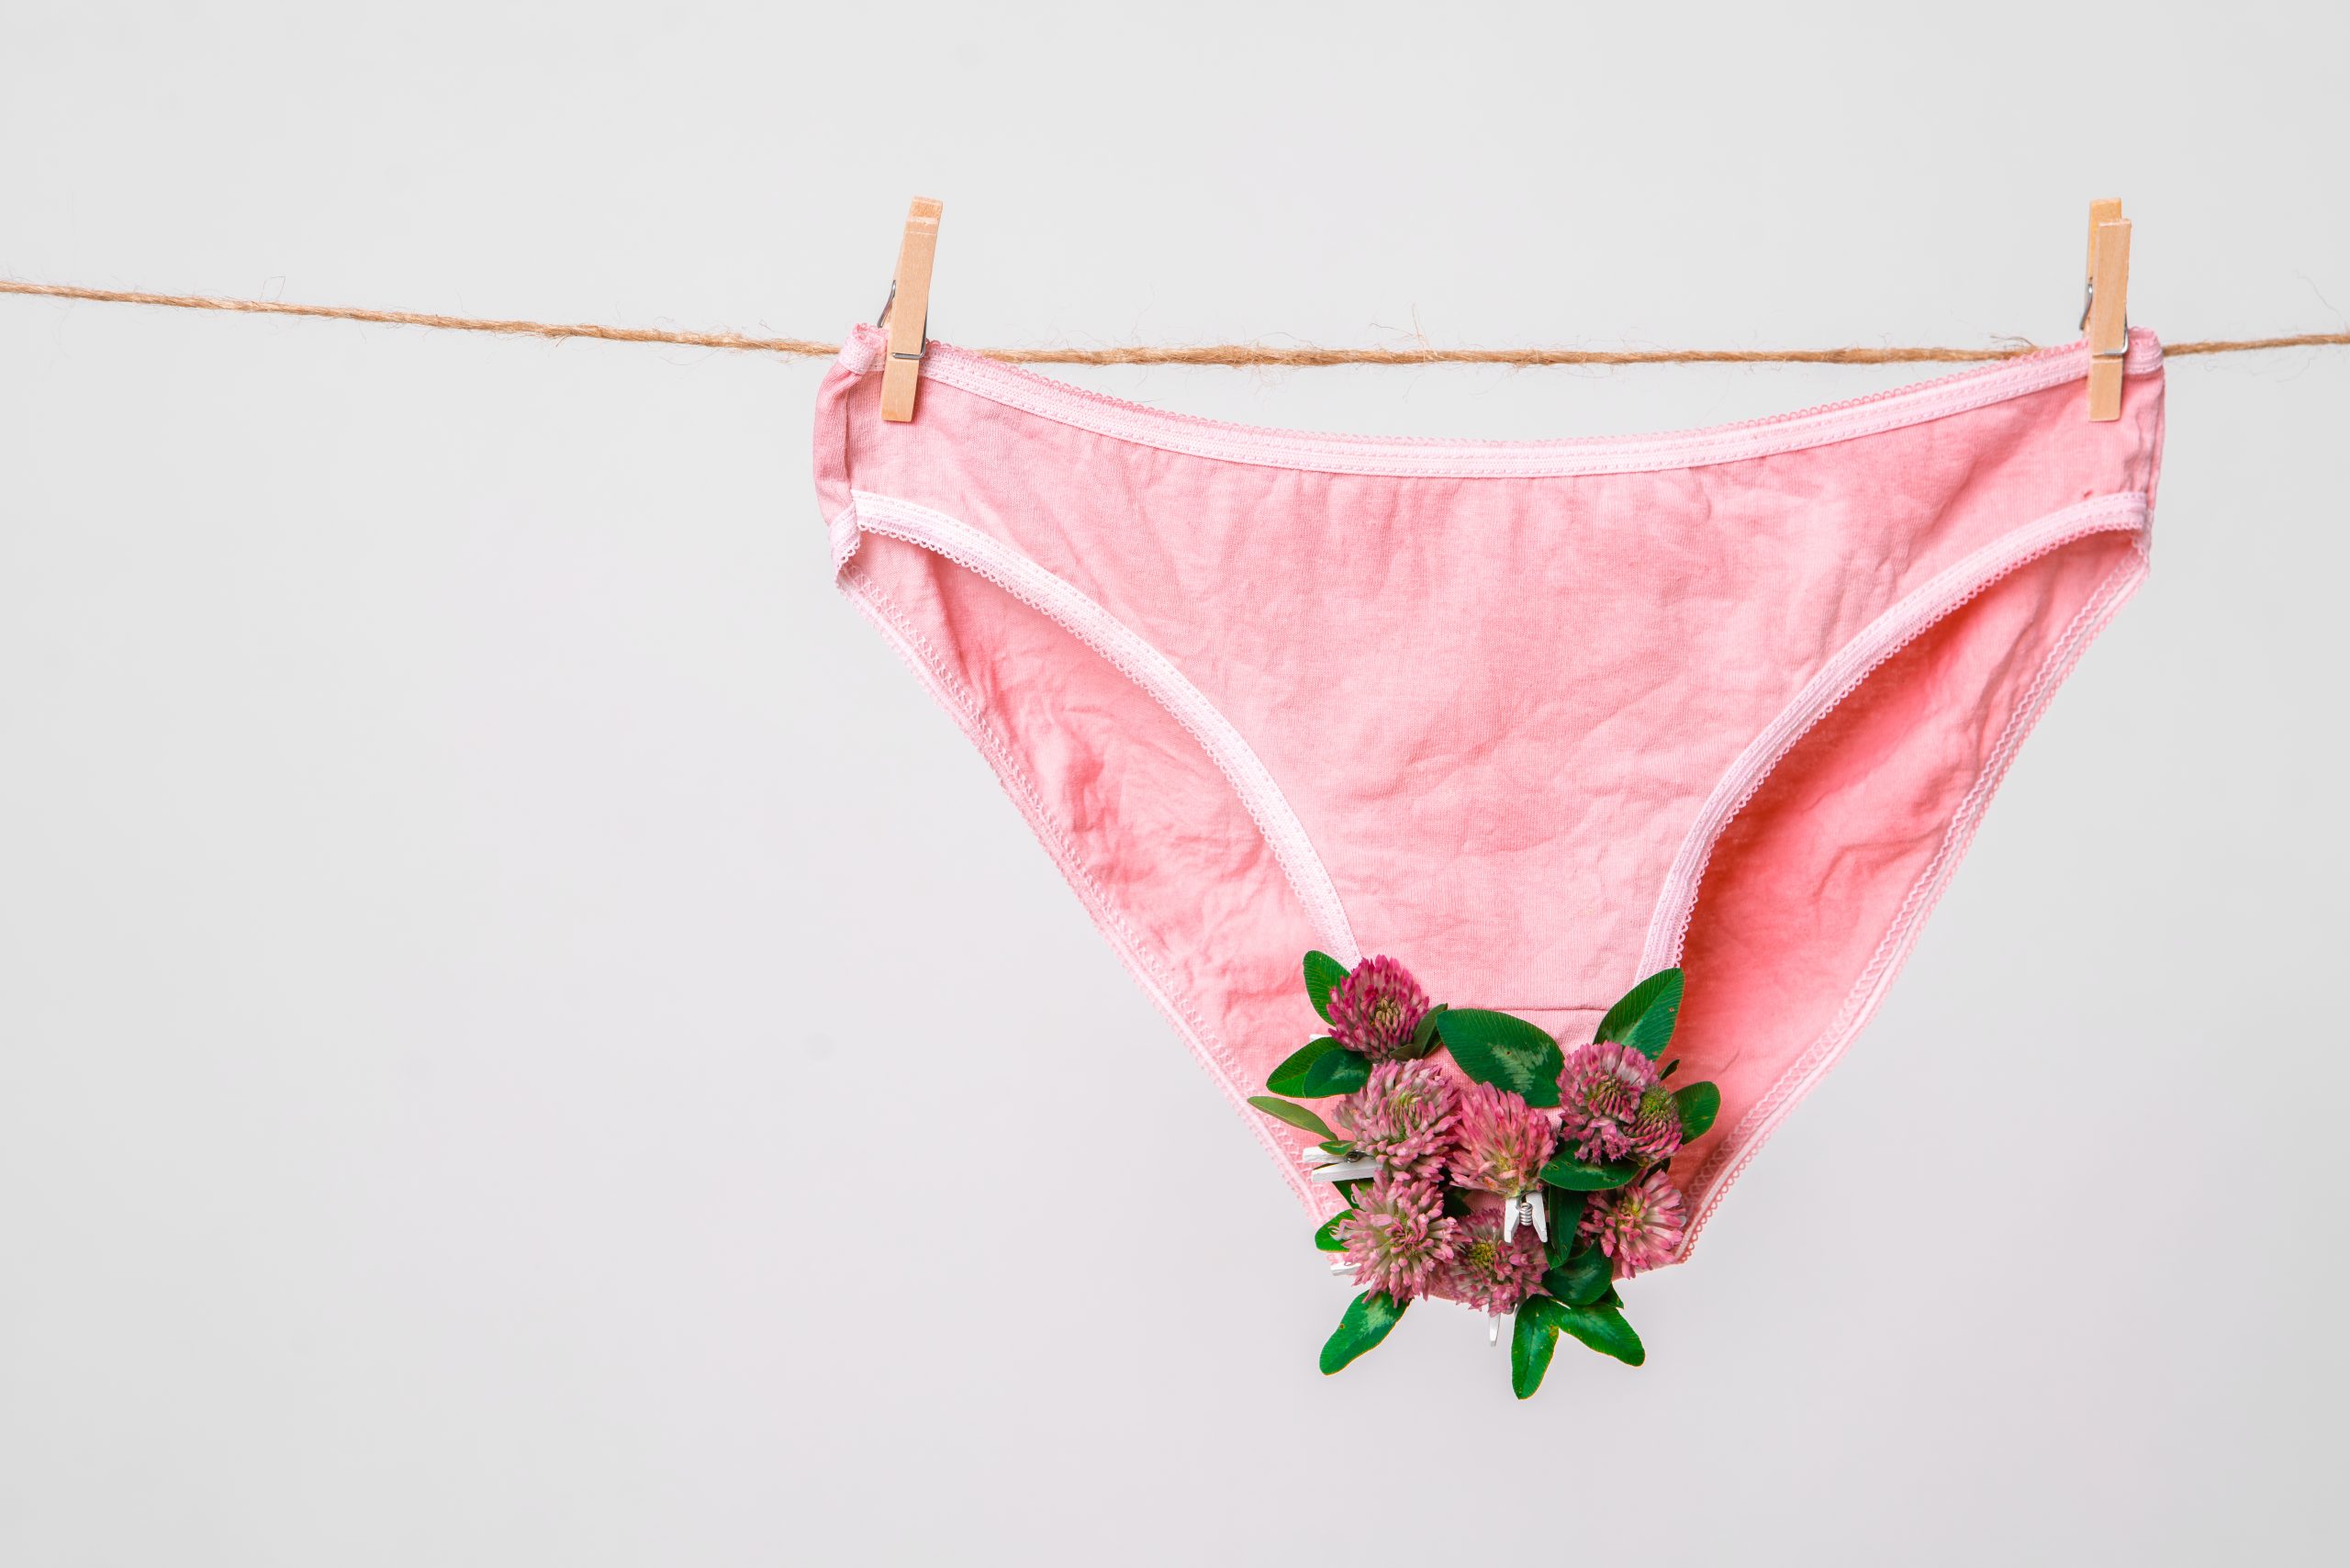 Why Does My Period Smell Like Ammonia? - PinkParcel